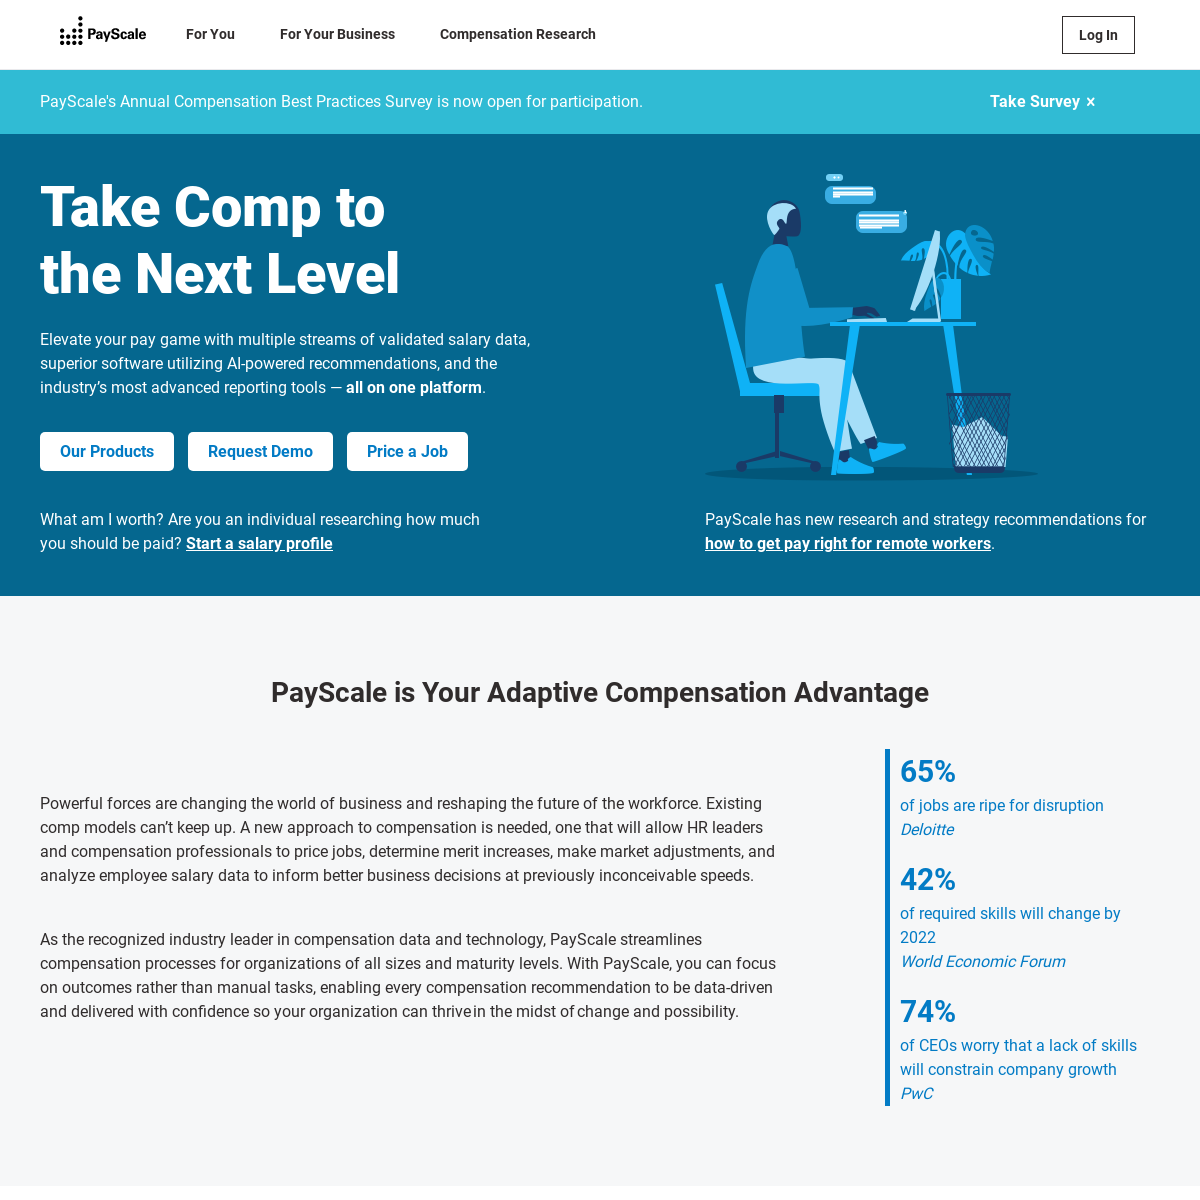 A complete backup of payscale.com